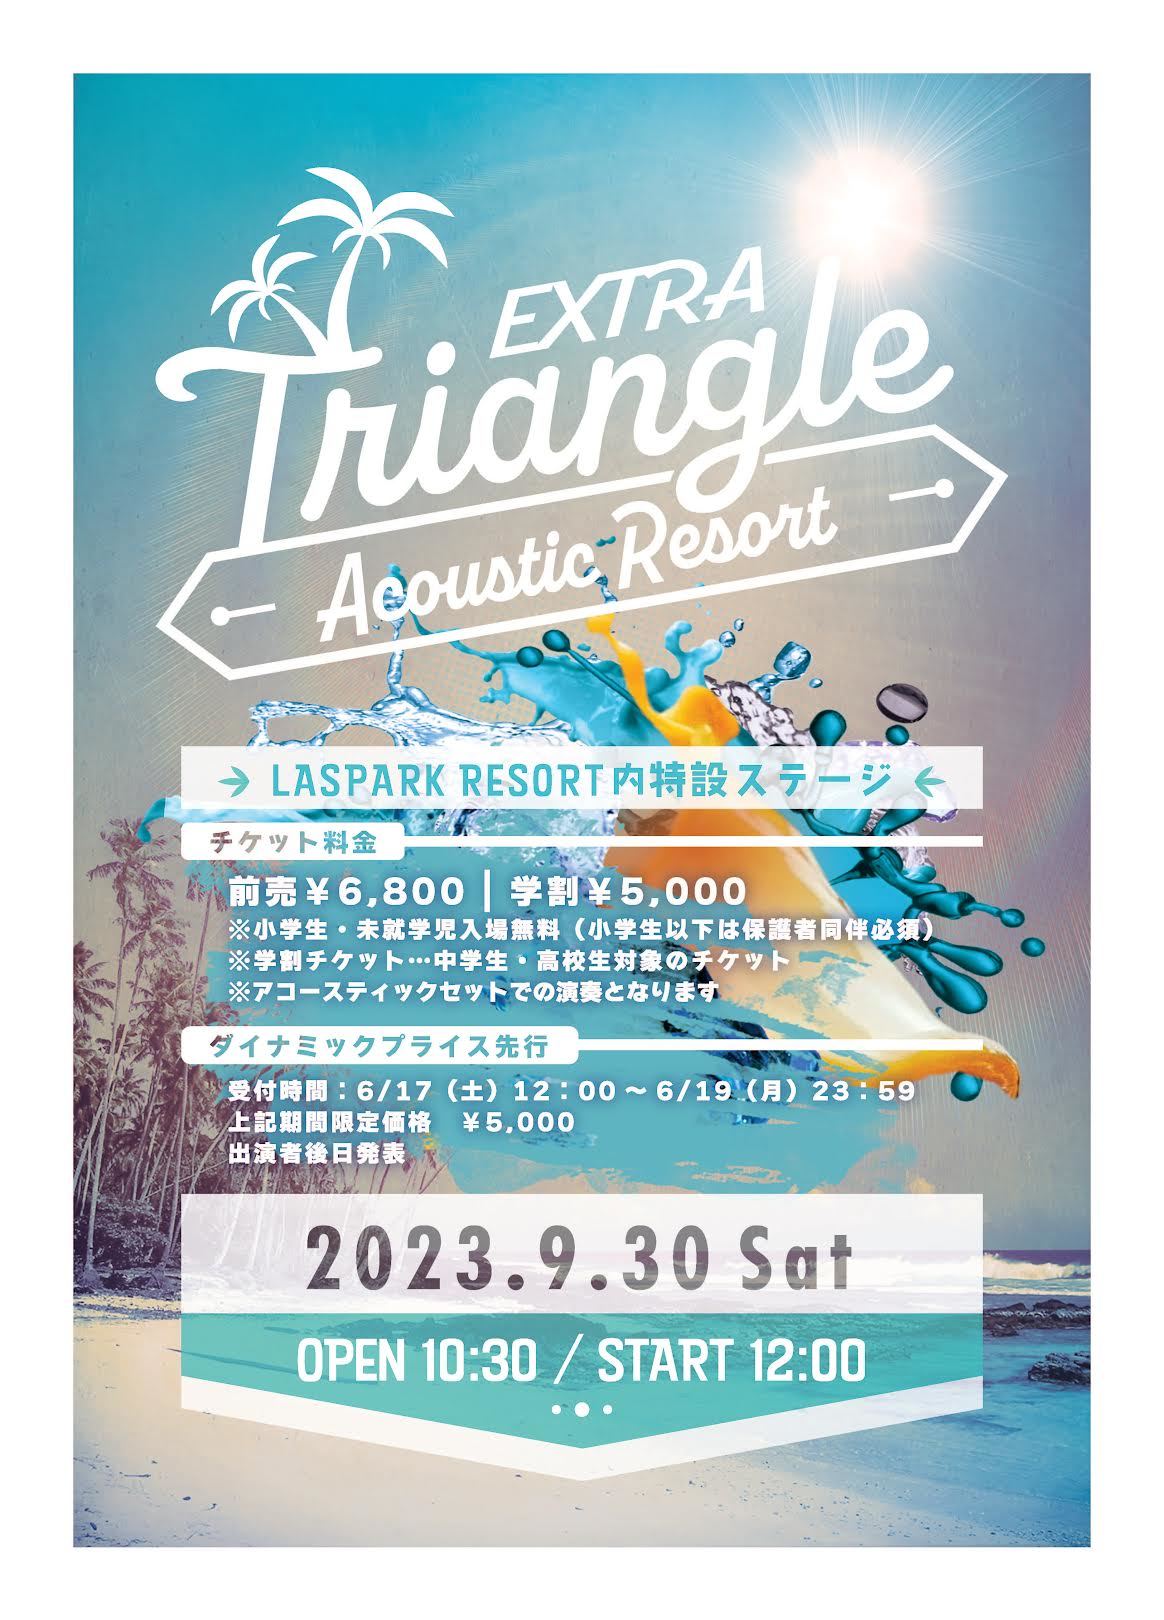 『TRIANGLE EXTRA Acoustic Resort』